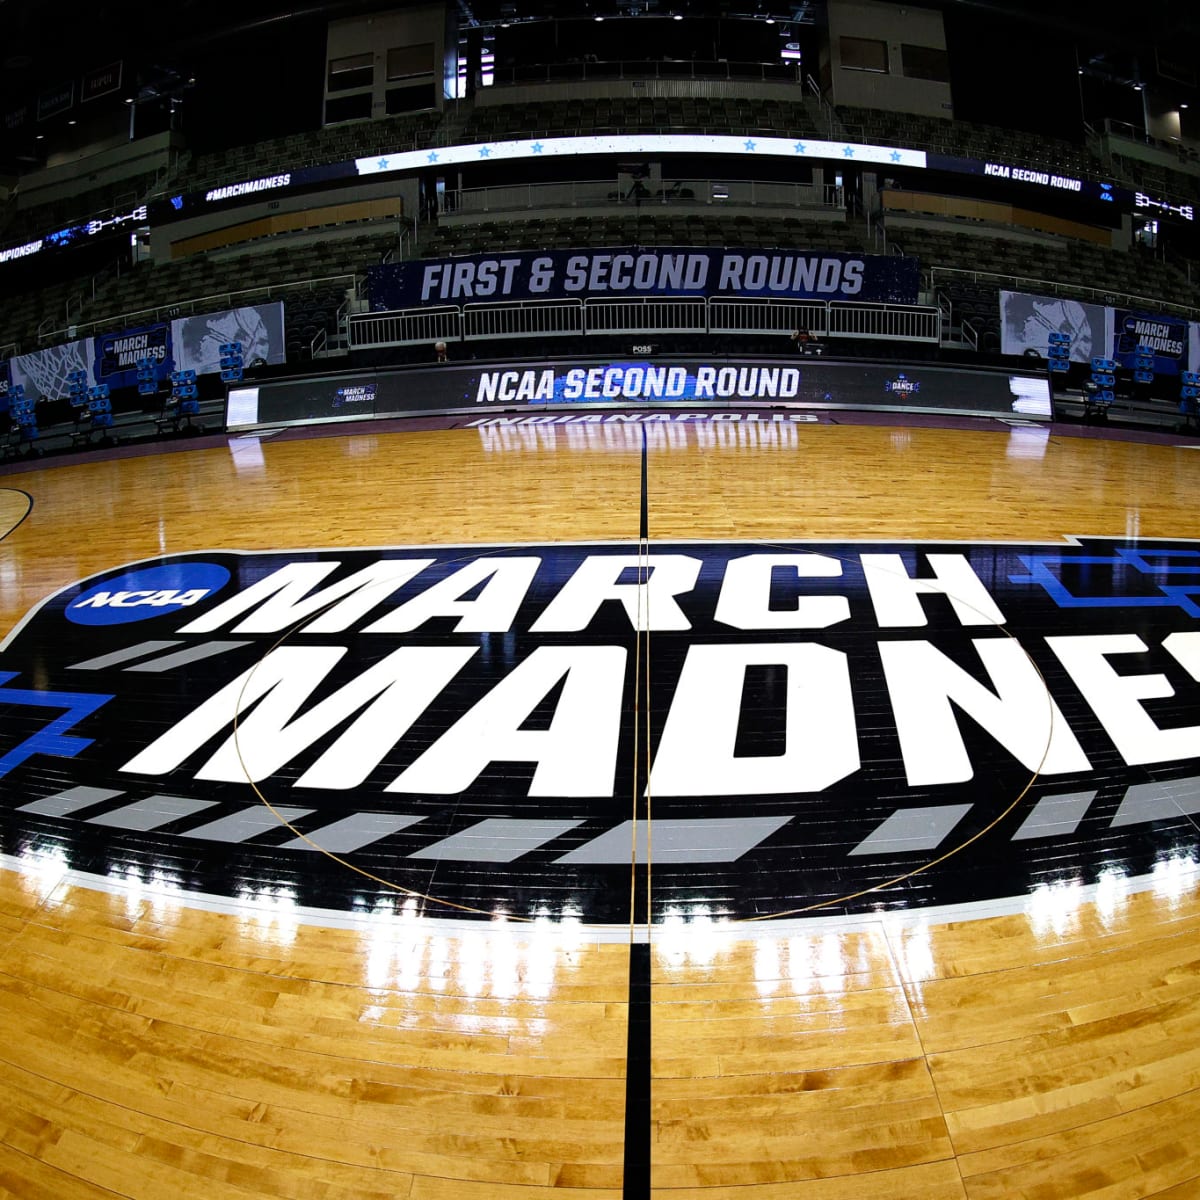 There Are 2 NCAA Tournament Games Tonight - Heres The Schedule